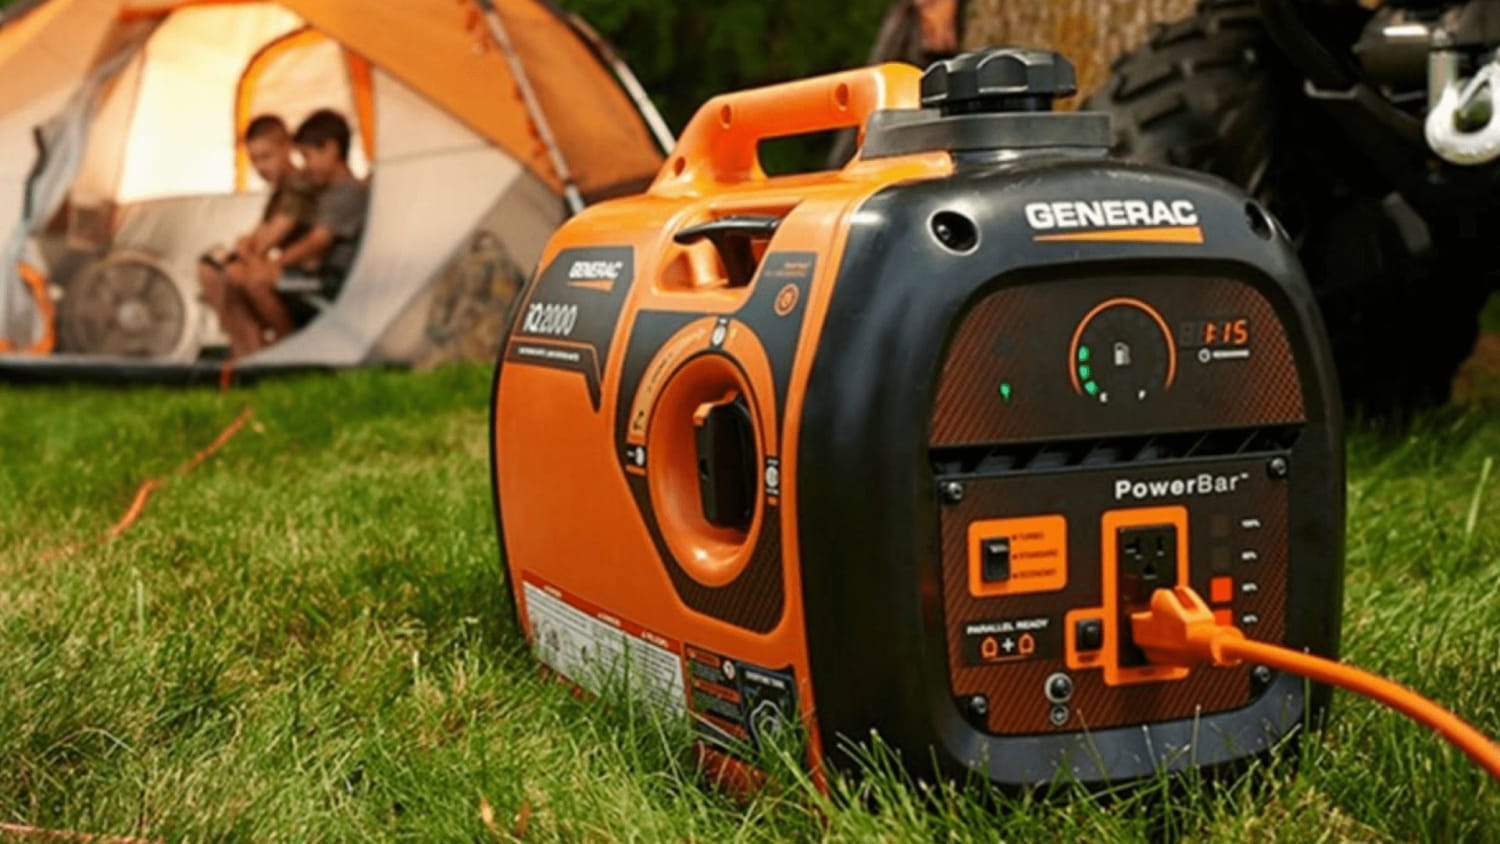 10 Best Portable Generators For Every Budget In 2020 [Home, Camping]